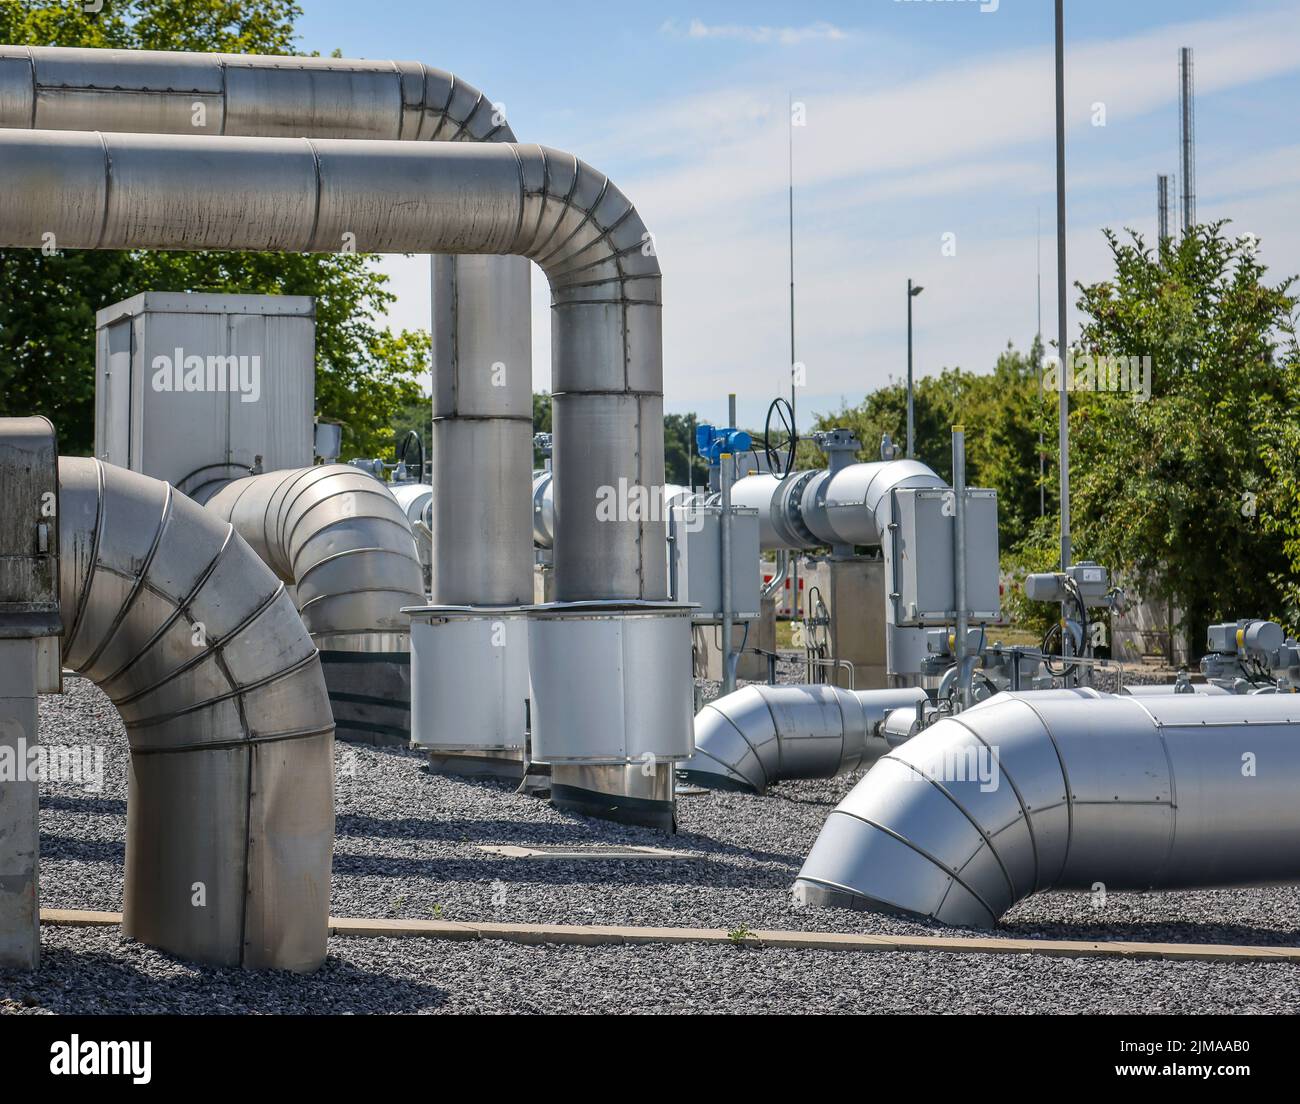 Werne, North Rhine-Westphalia, Germany - Compressor Stadium and Pumping Station for Natural Gas. Open Grid Europe, Werne Station. The OGE compressor s Stock Photo